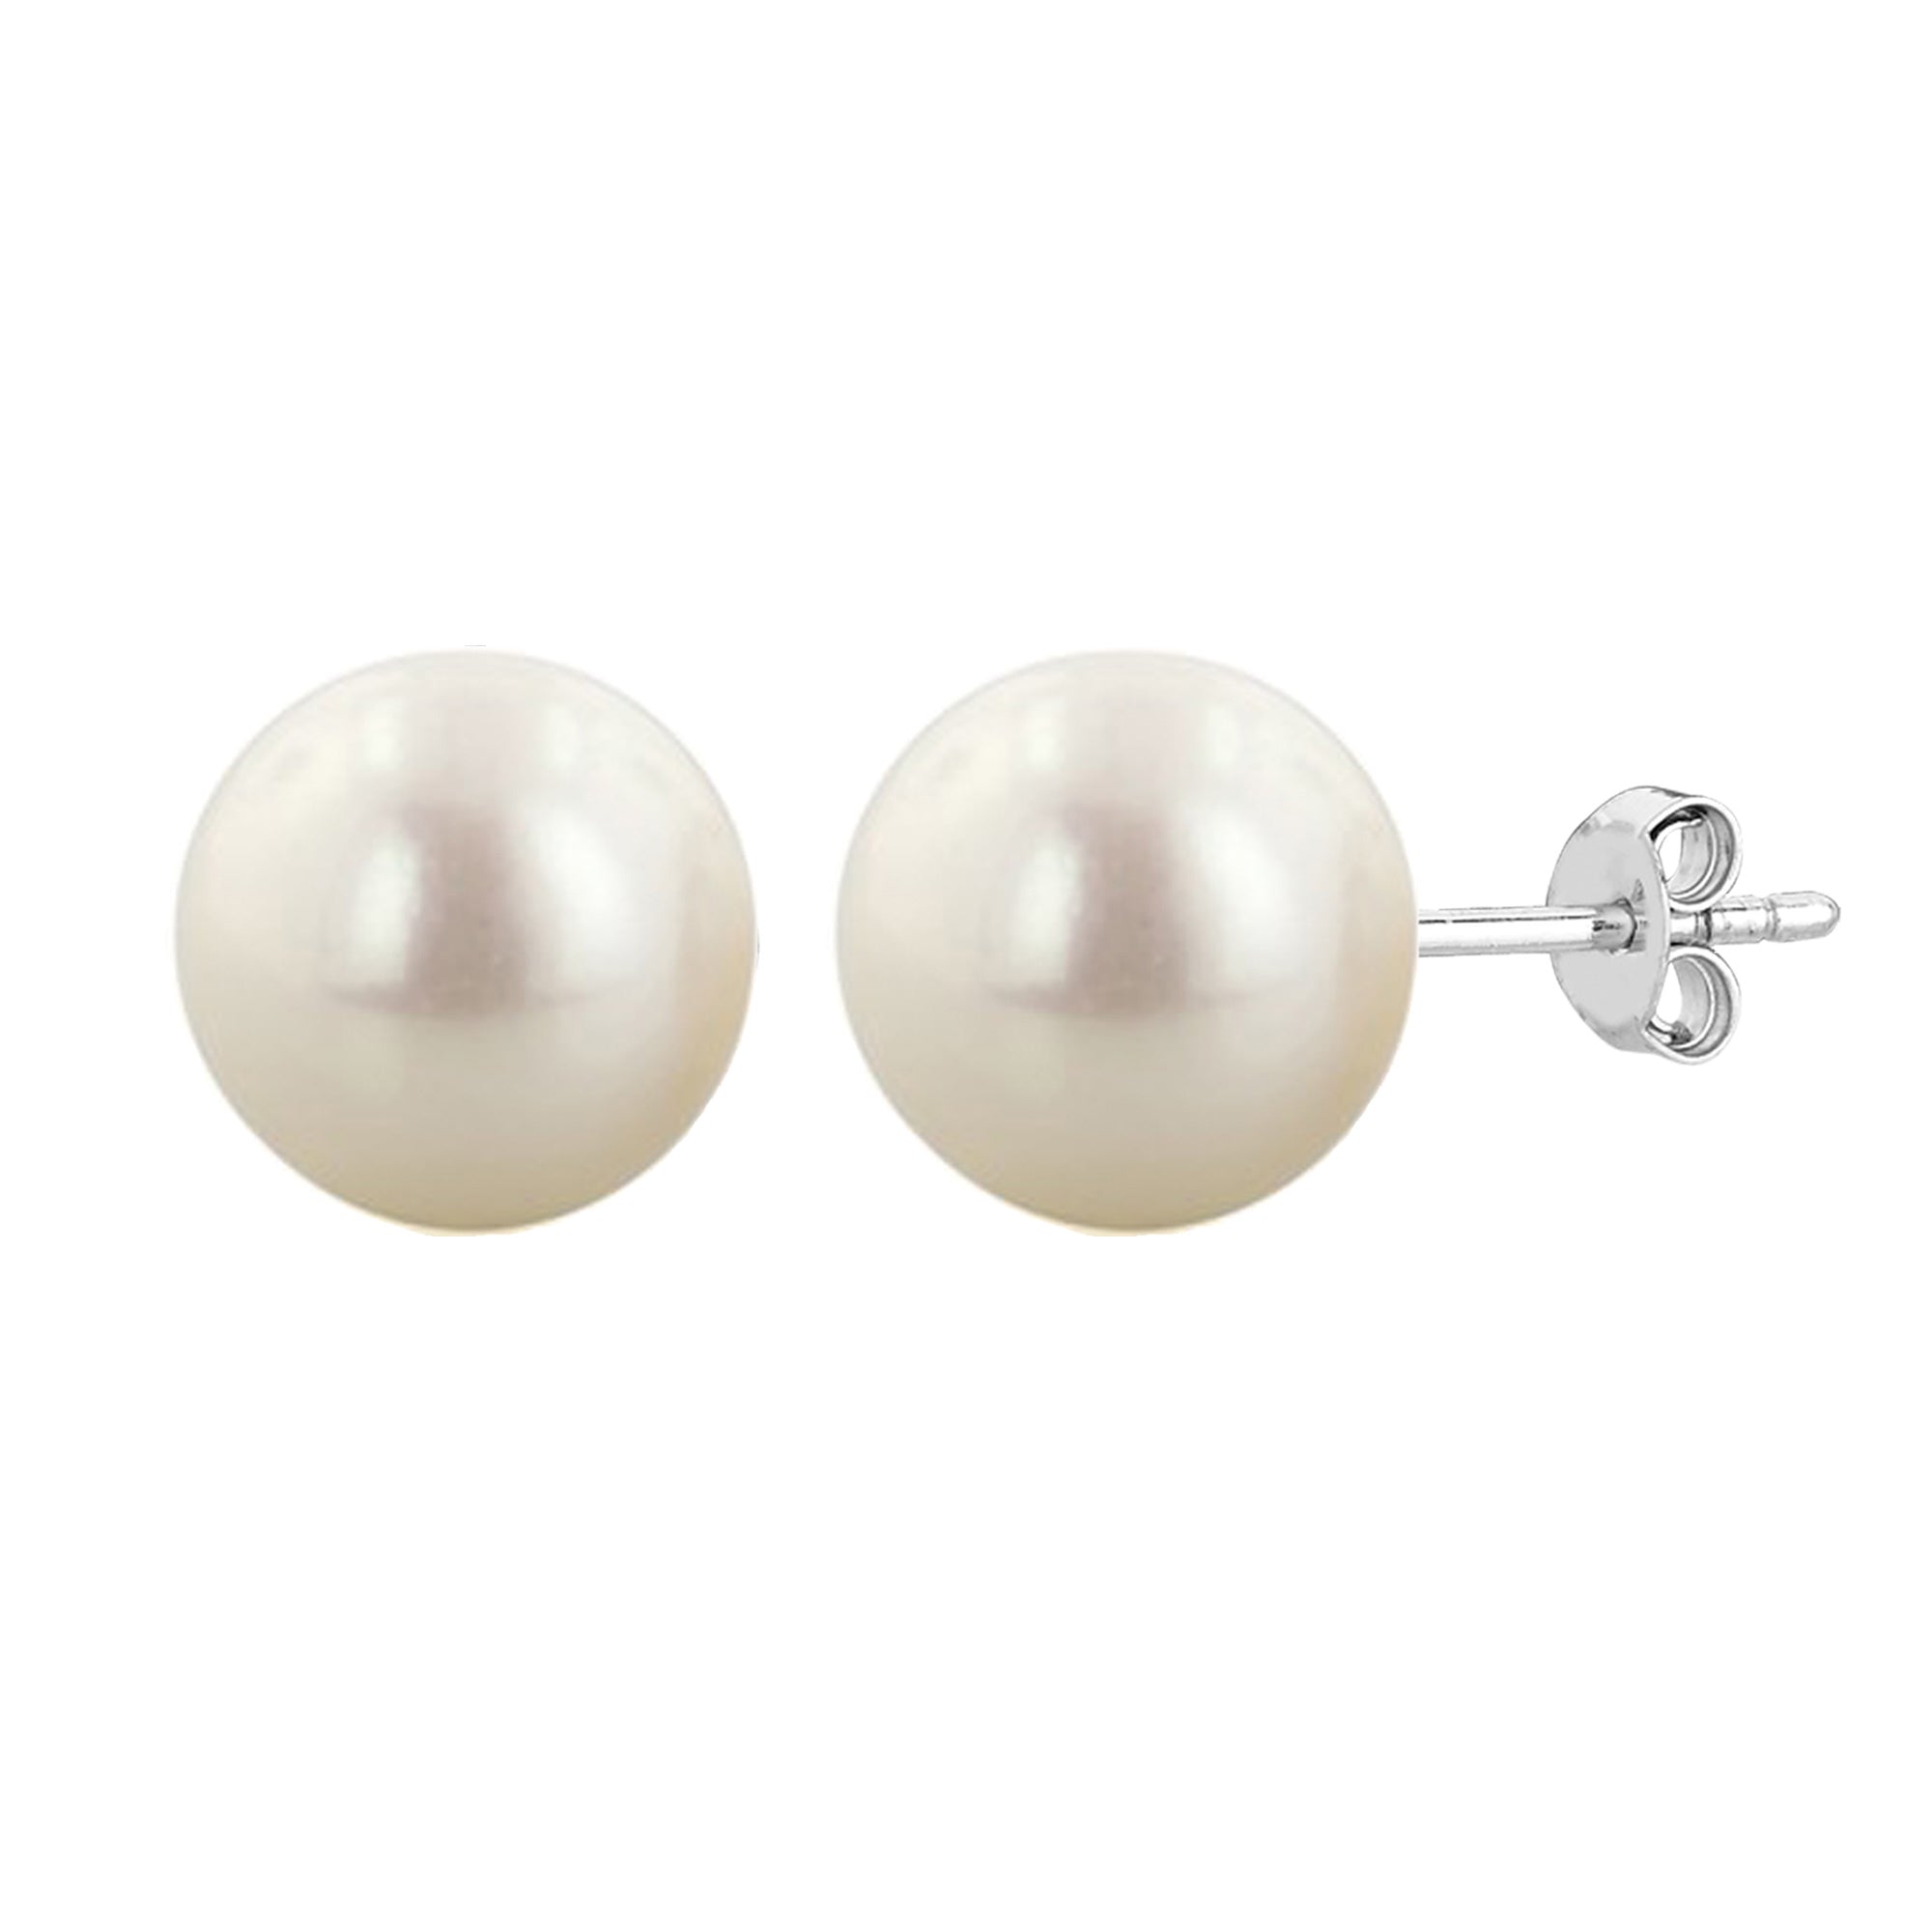 Sterling Silver Rhodium Finish 4mm White Fresh Water Pearl Stud Earring